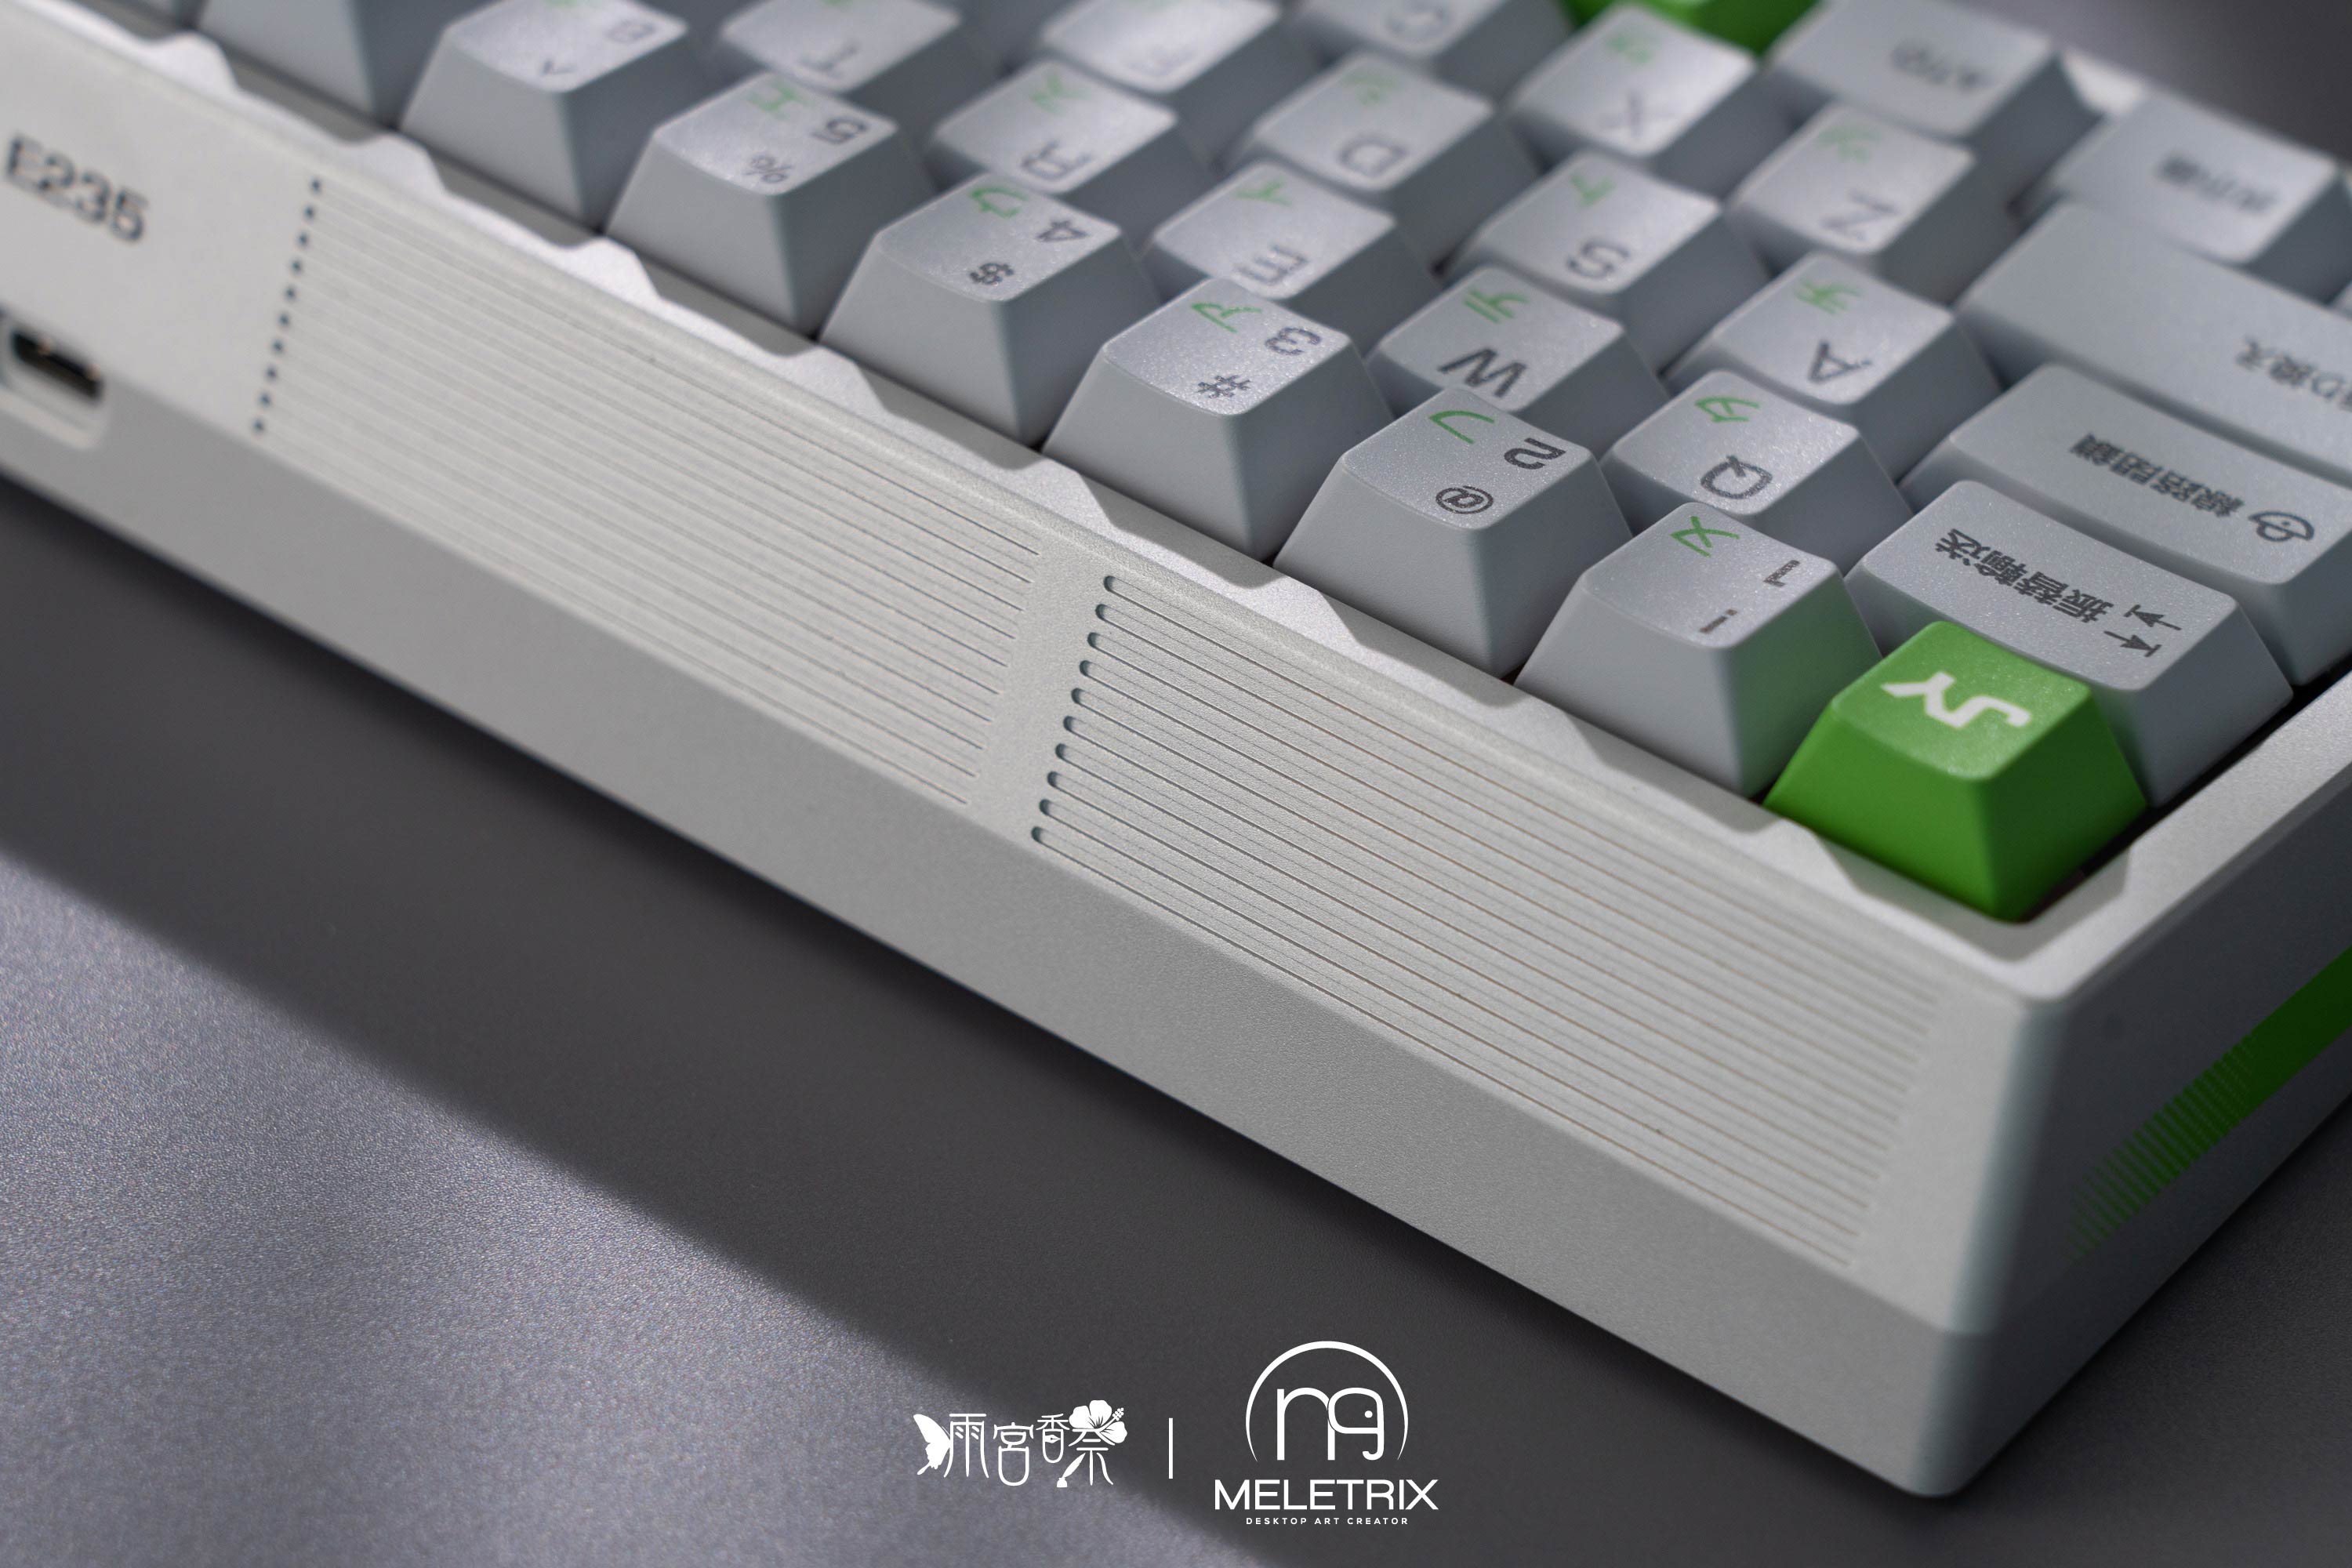 [In Stock] WS Yamanote Line Theme Keycaps